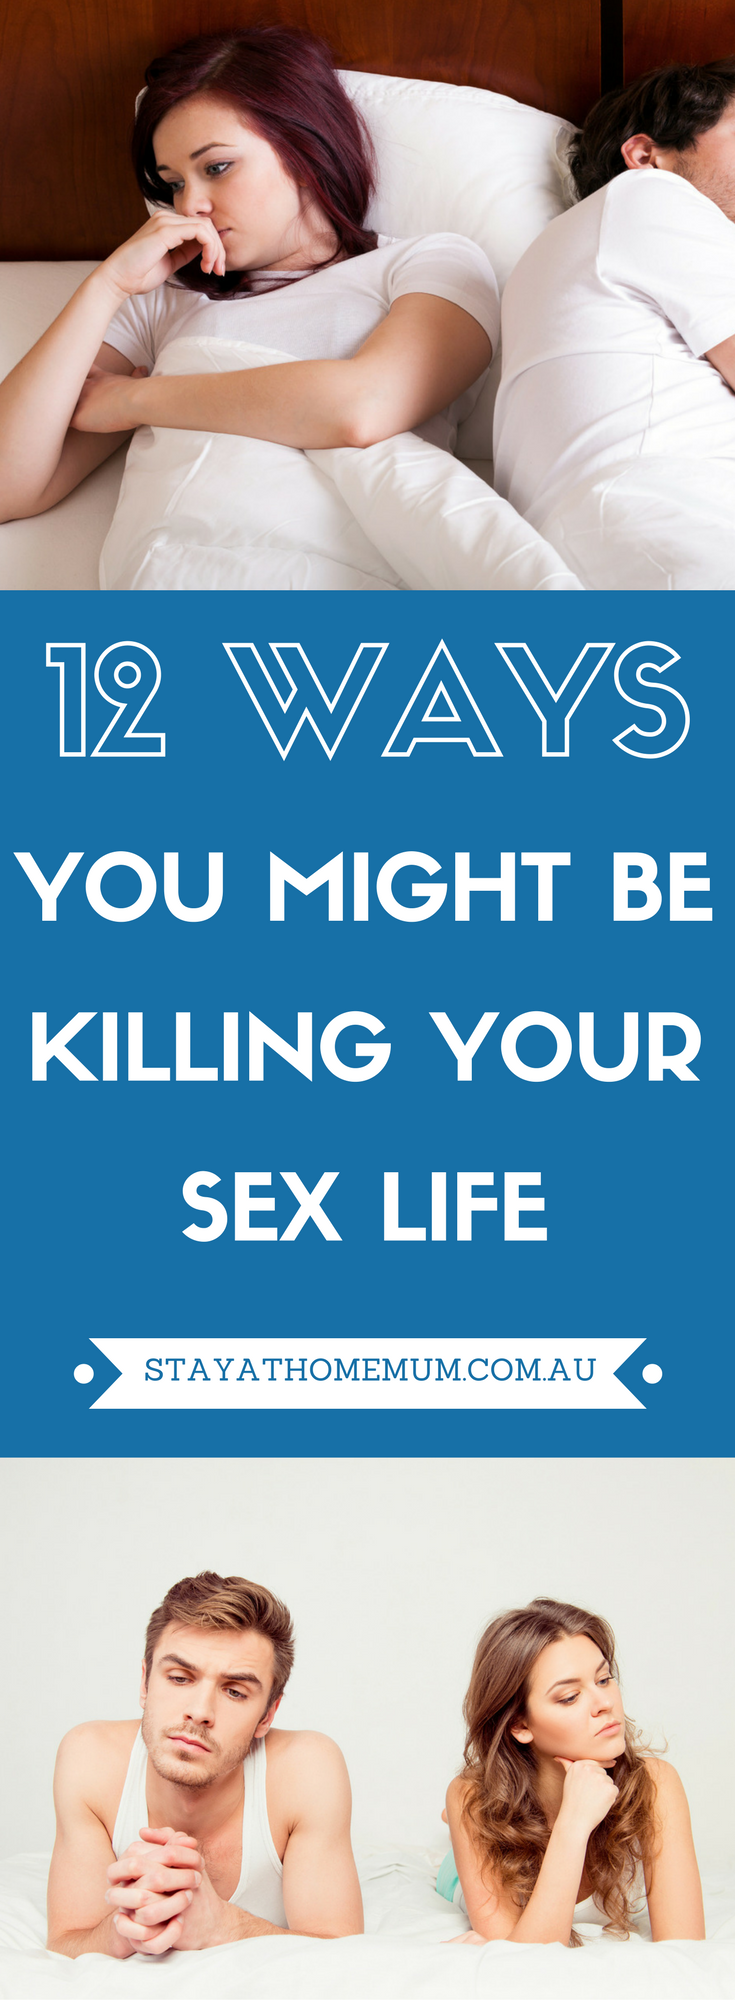 12 Ways You Might Be Killing Your Sex Life (1)